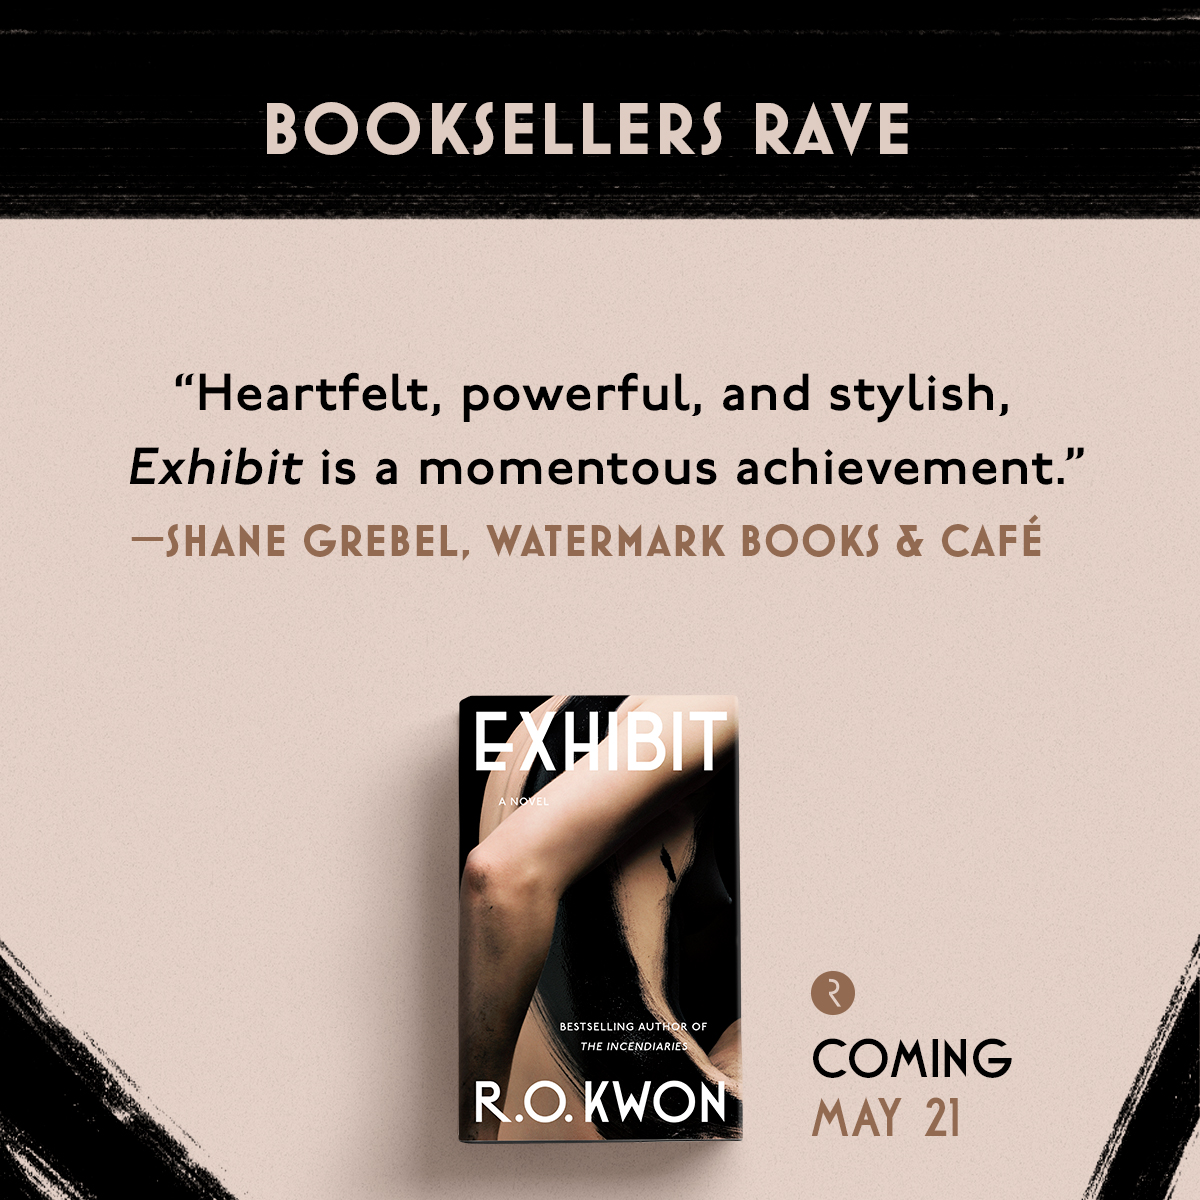 Booksellers like Shane at @Watermarkbooks are RAVING about @rokwon's latest novel 😍 Read more about EXHIBIT, coming 5/21, here: bit.ly/3ZFXXom